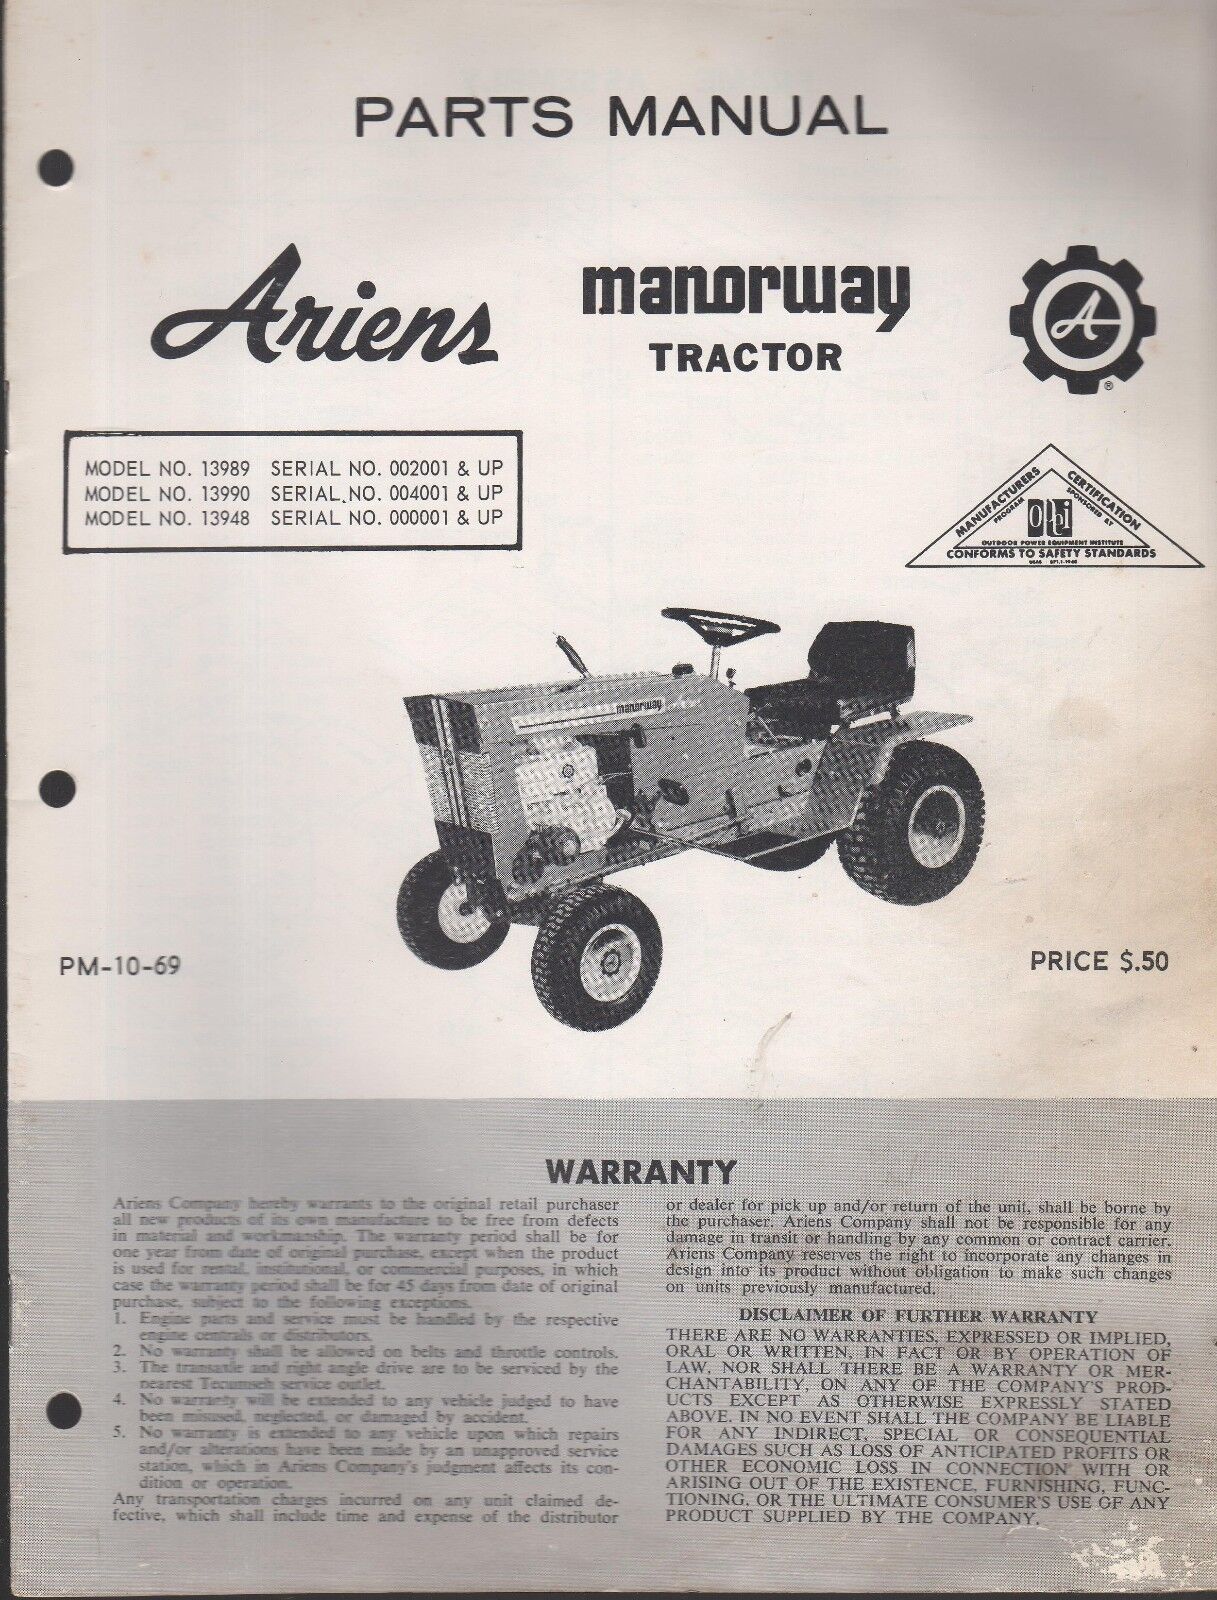 ARIENS MODEL 13989,13990,13948 MANORWAY TRACTOR PARTS MANUAL PM-10-69  (772) 